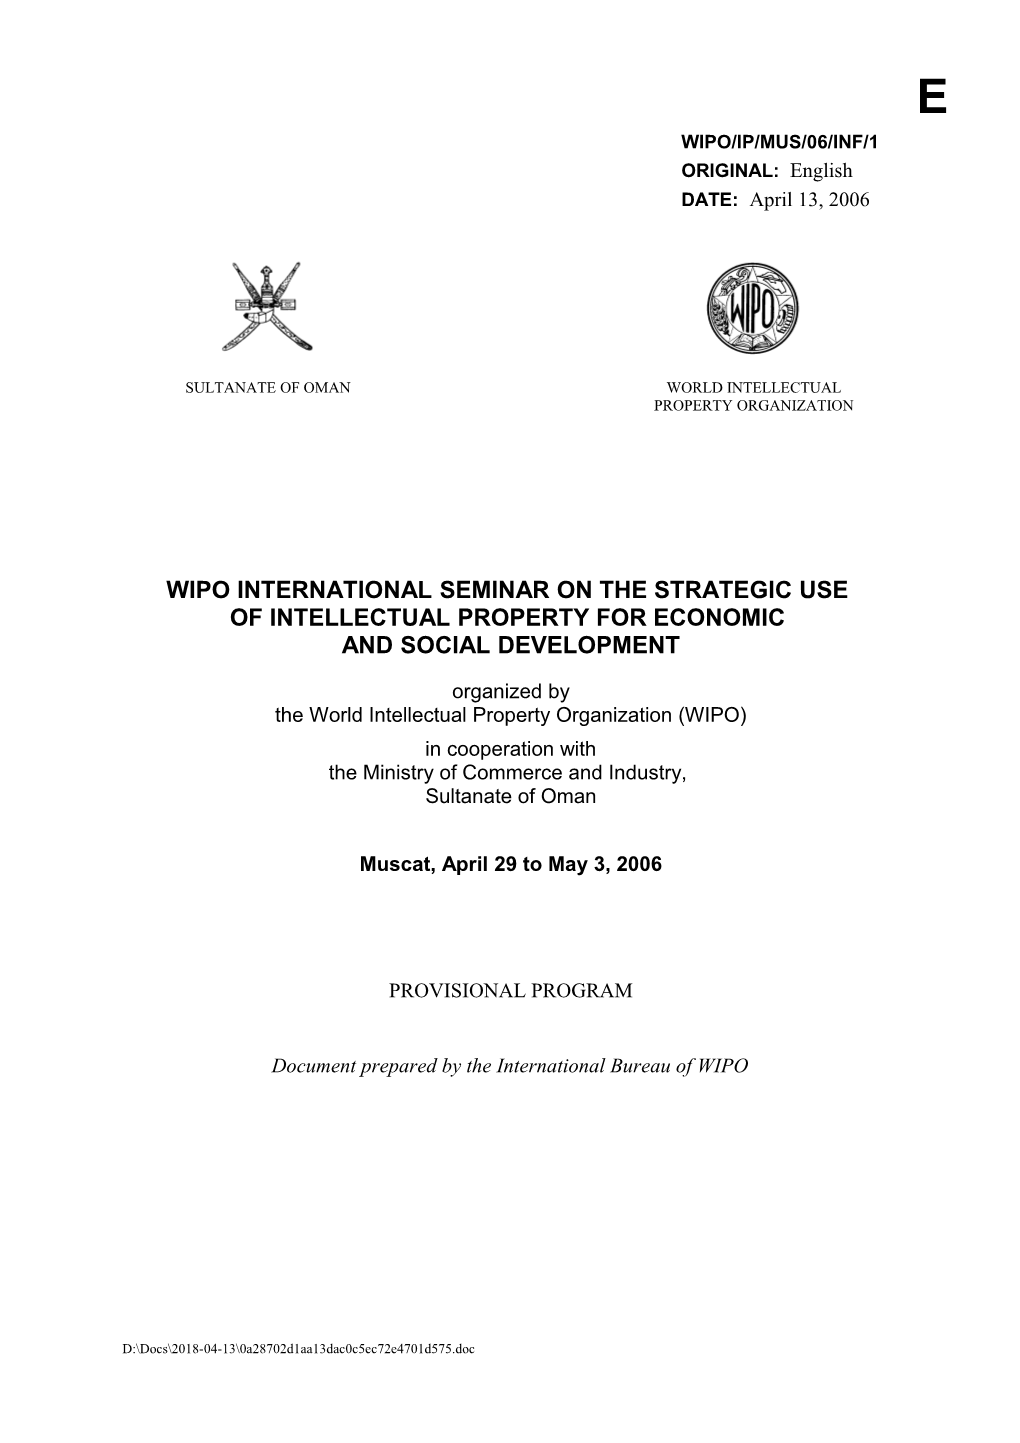 WIPO/IP/MUS/06/INF/1 Prov